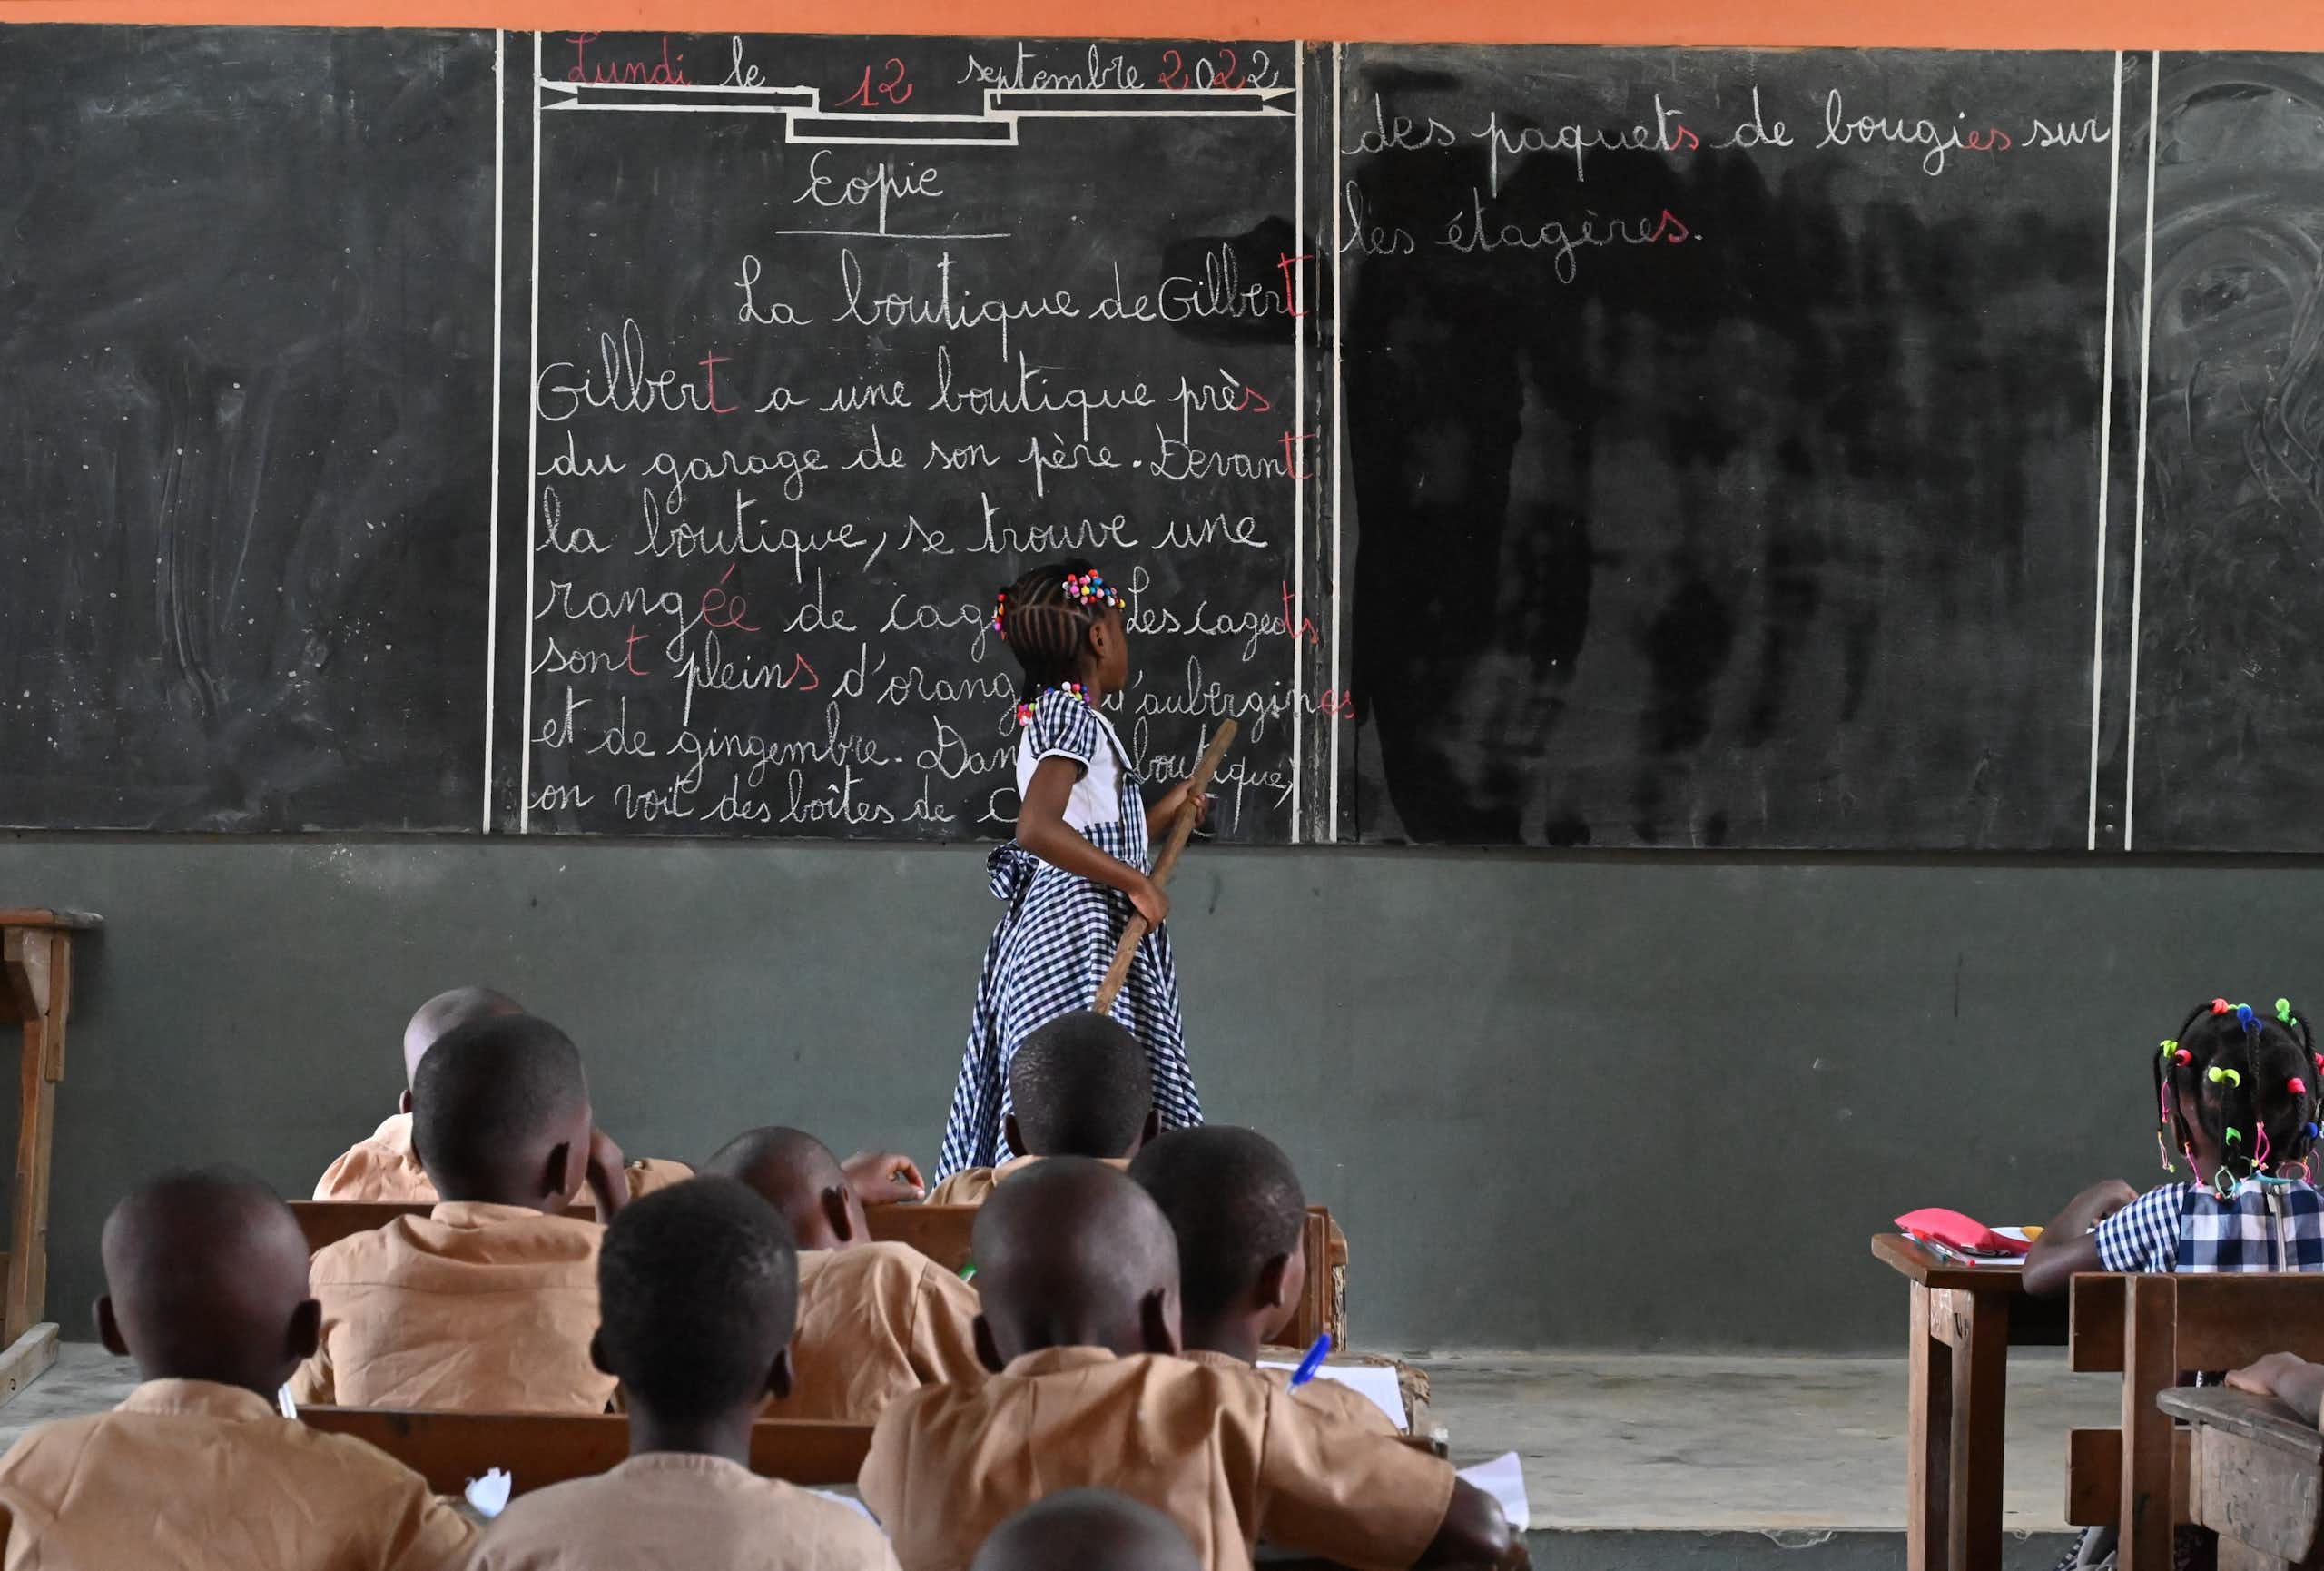 A girl standing in front of a blackboard